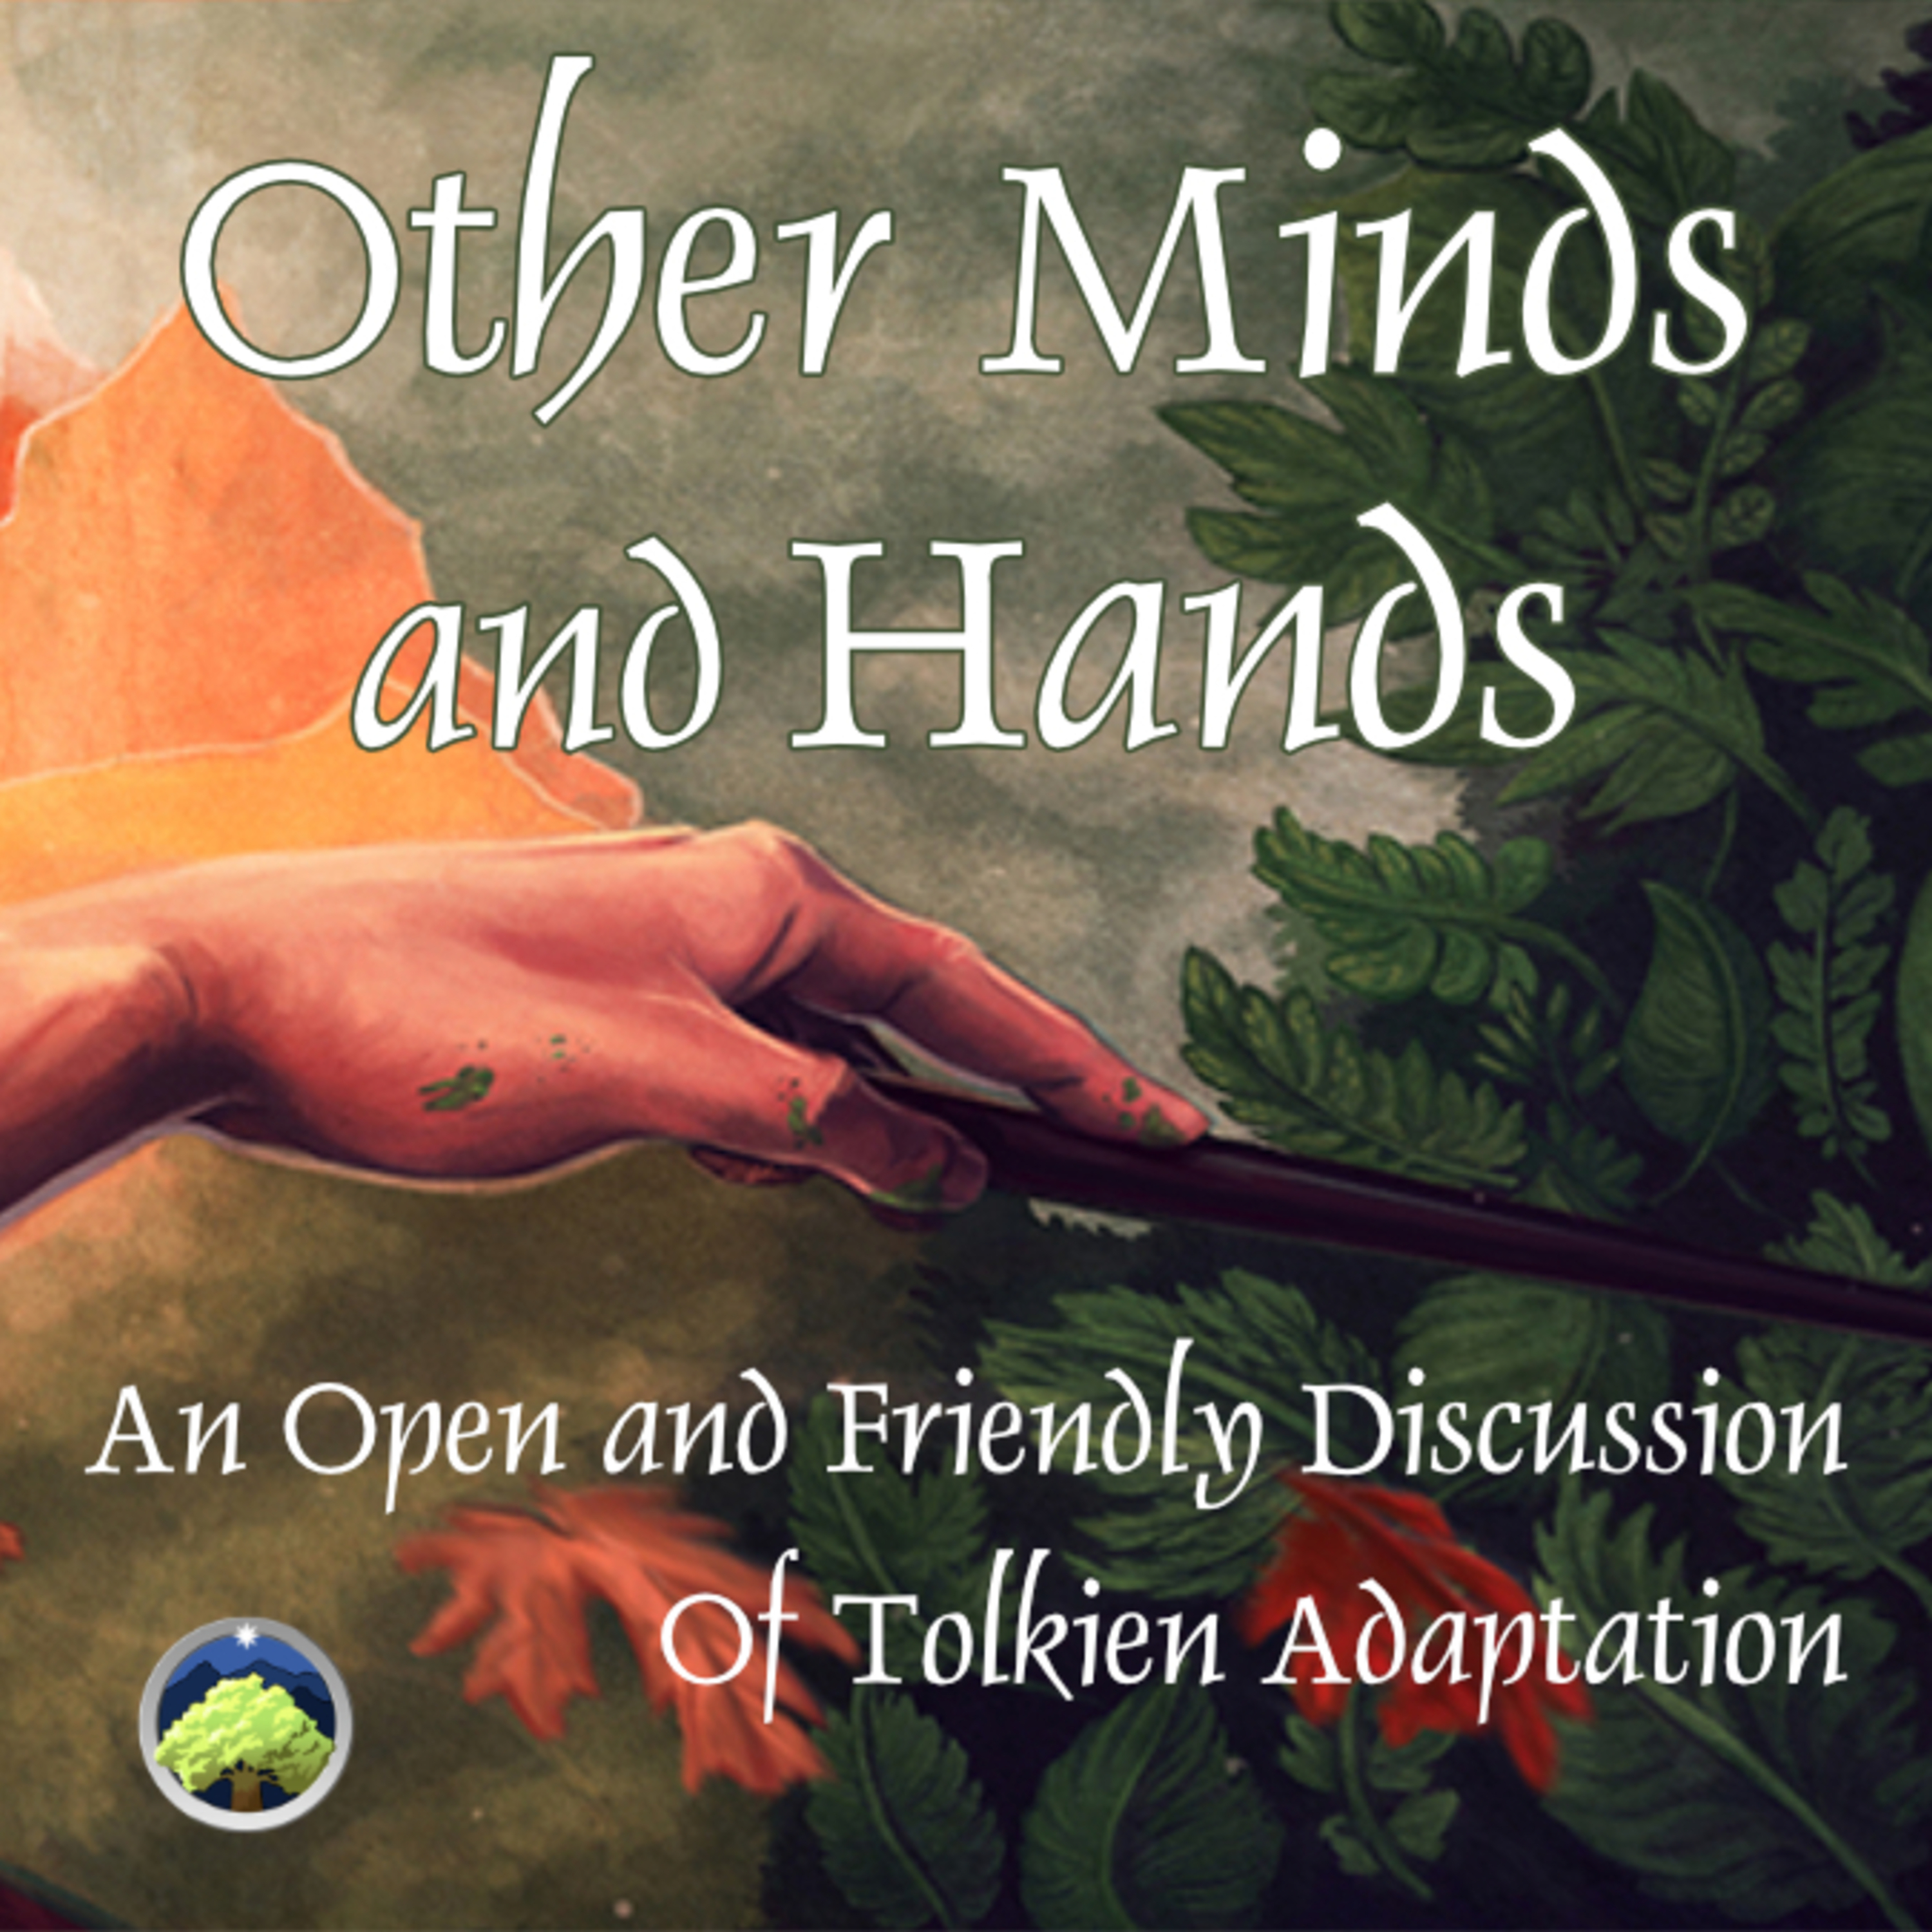 466: Other Minds and Hands, Episode 4